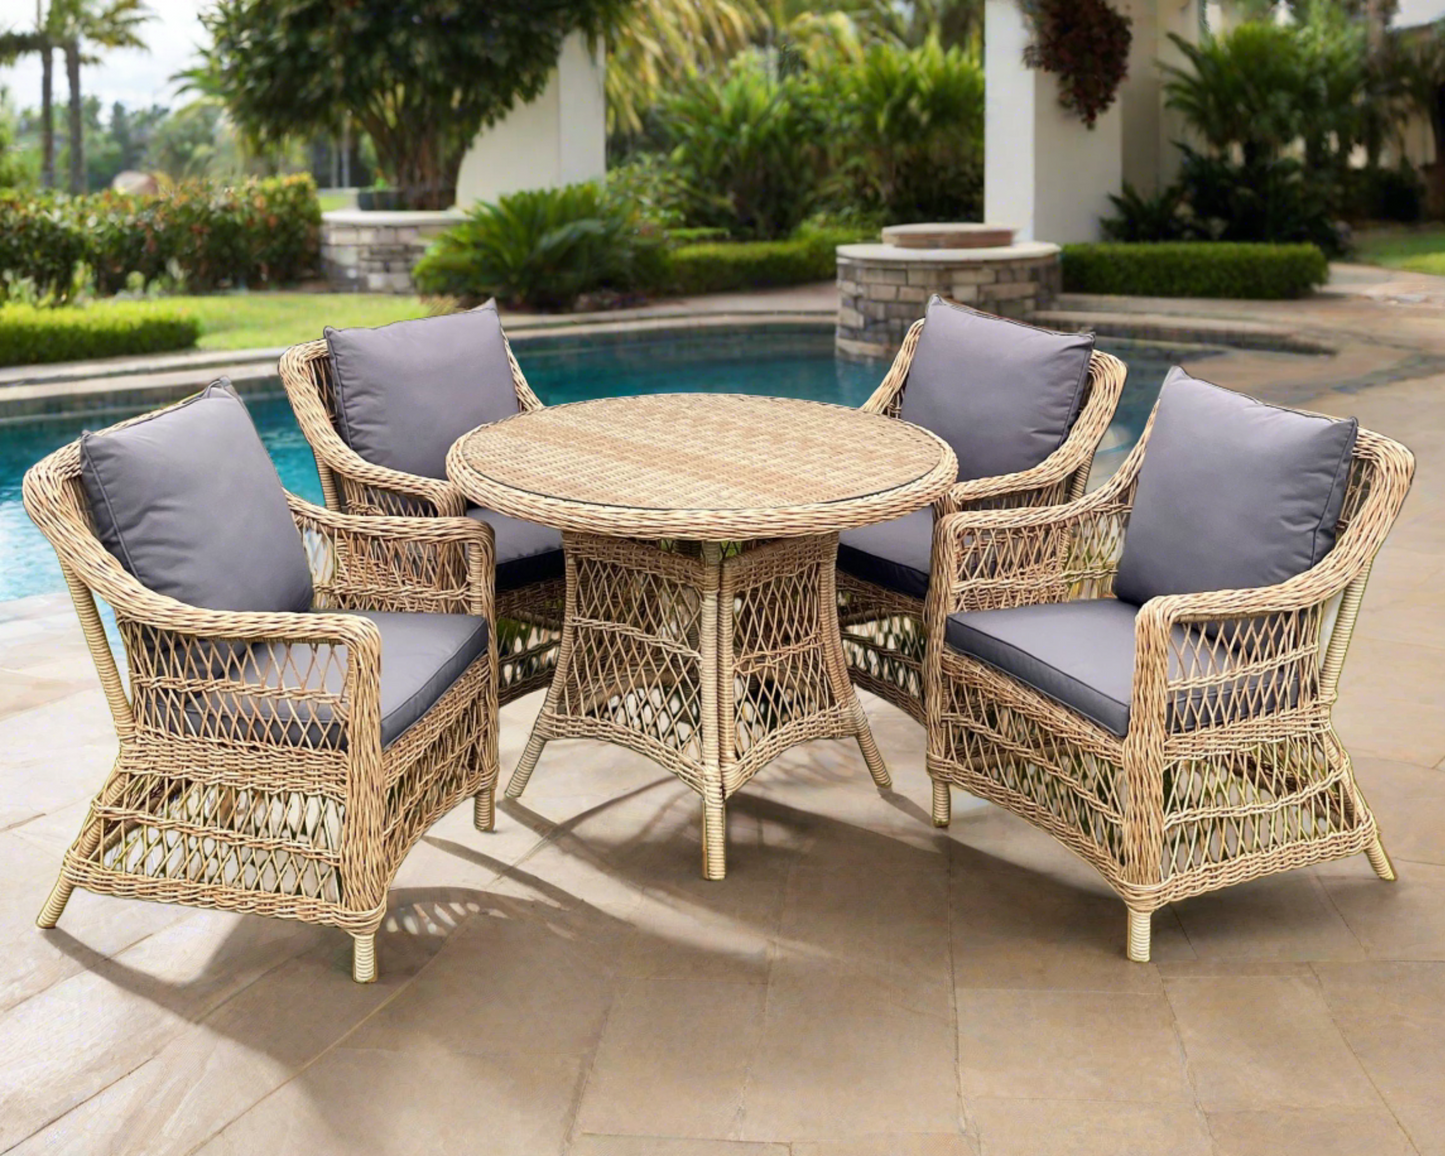 AMOIR 5-Piece Set Outdoor Wicker 4 Seat Dining Table Chair - Light Brown